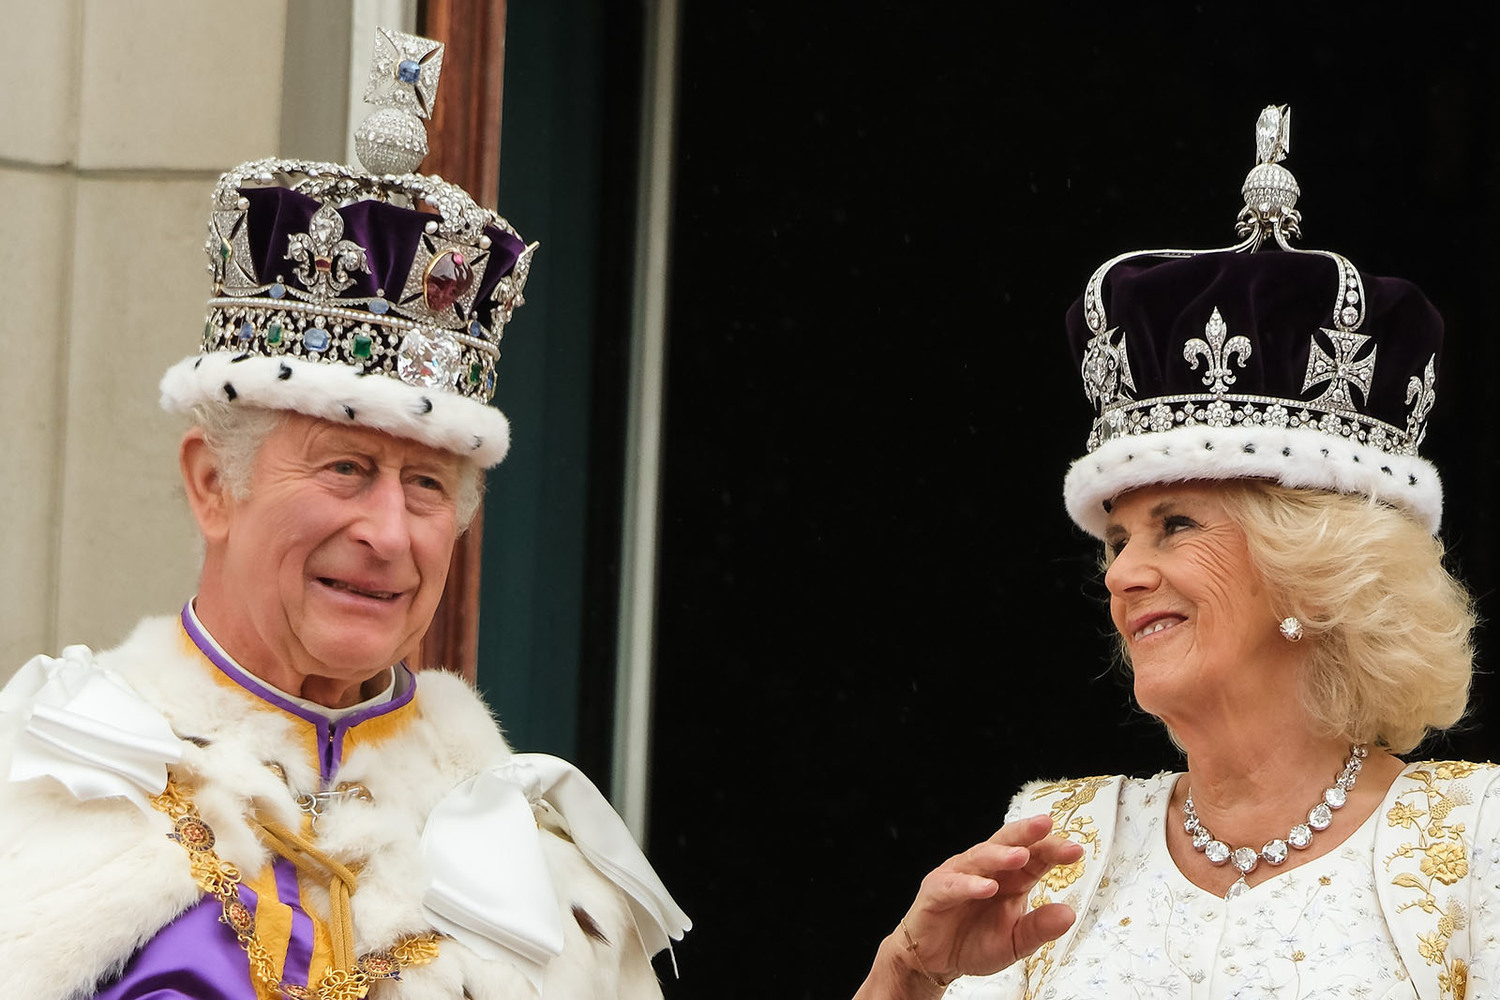 Charles III was diagnosed with cancer: how the king has changed since the death of Elizabeth